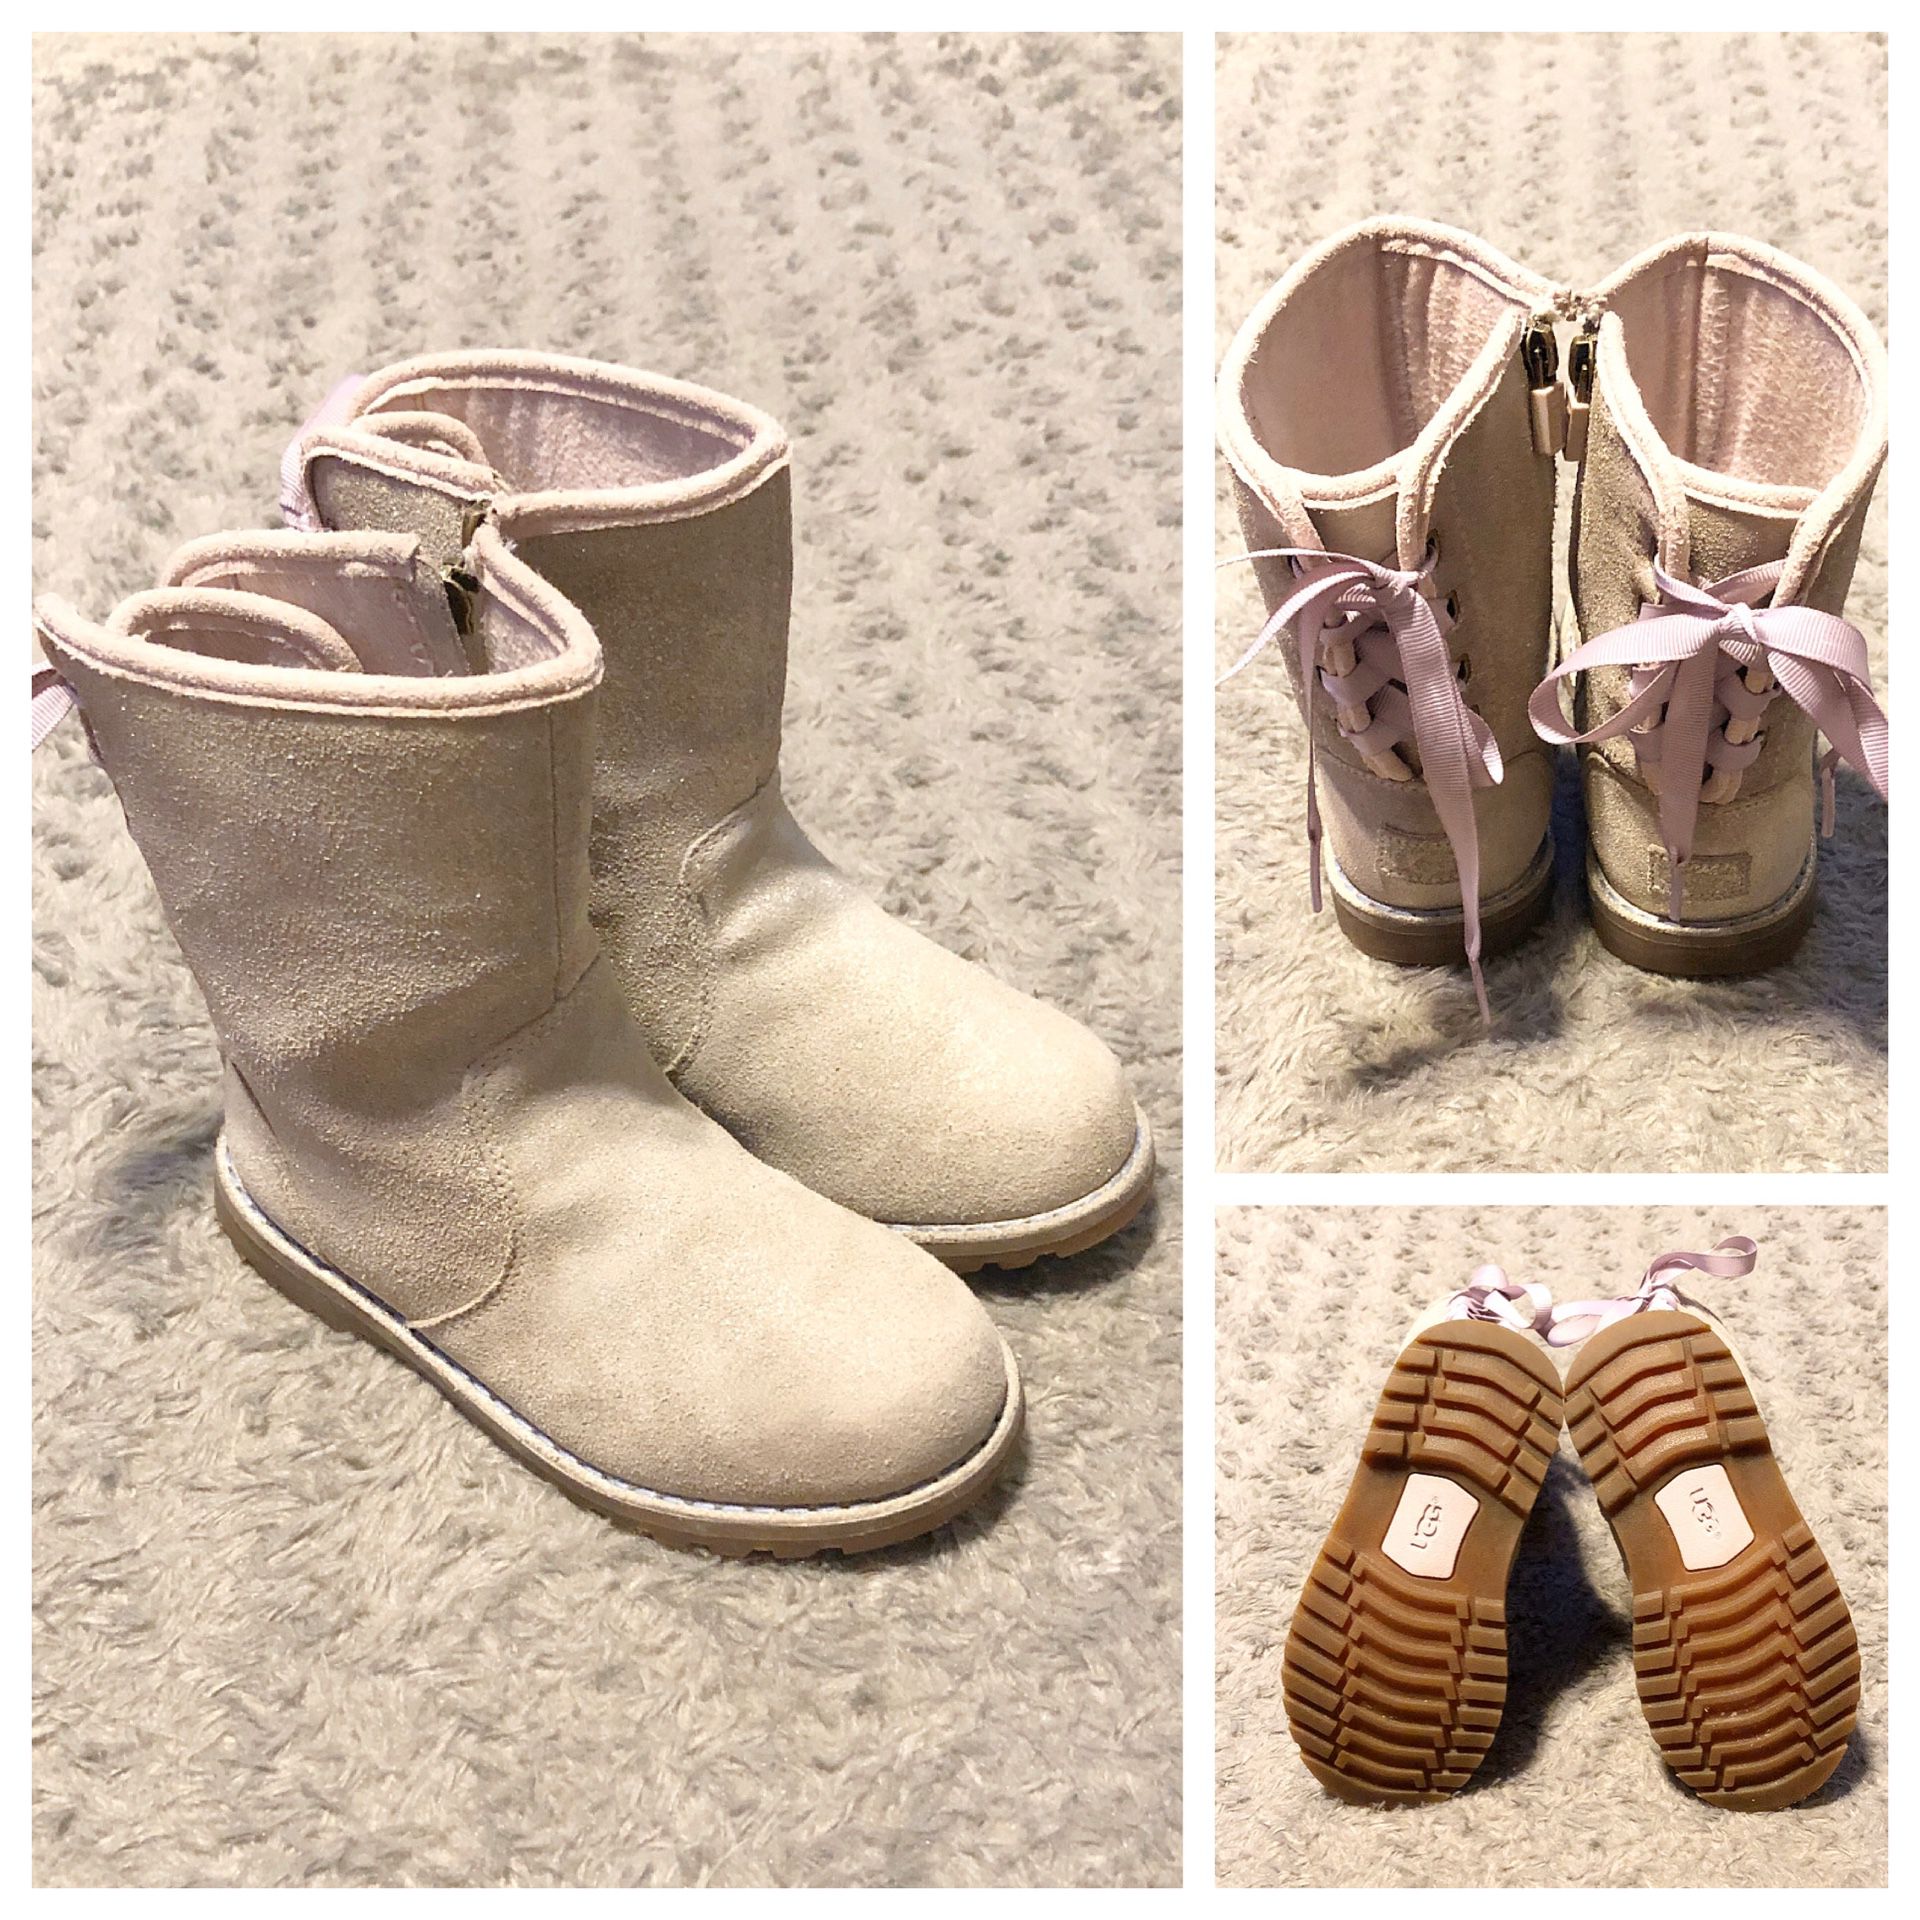 Girl's UGG Corene boots paid $98 size 10 Good condition! Color gold Metallic Gold No rips, tears or issues normal wear. Super cute!